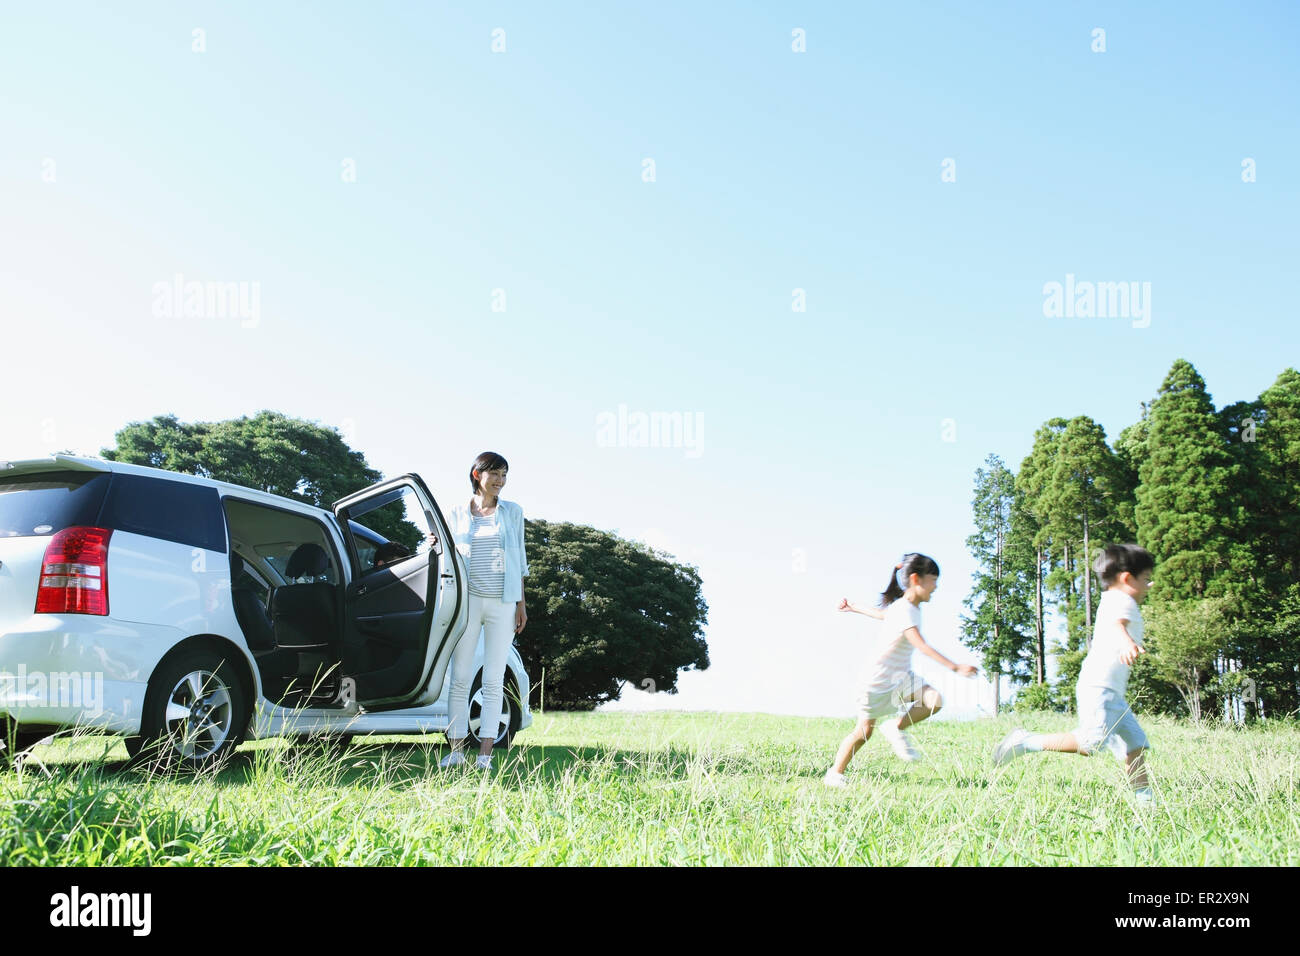 Japanese family with car in a city park Stock Photo